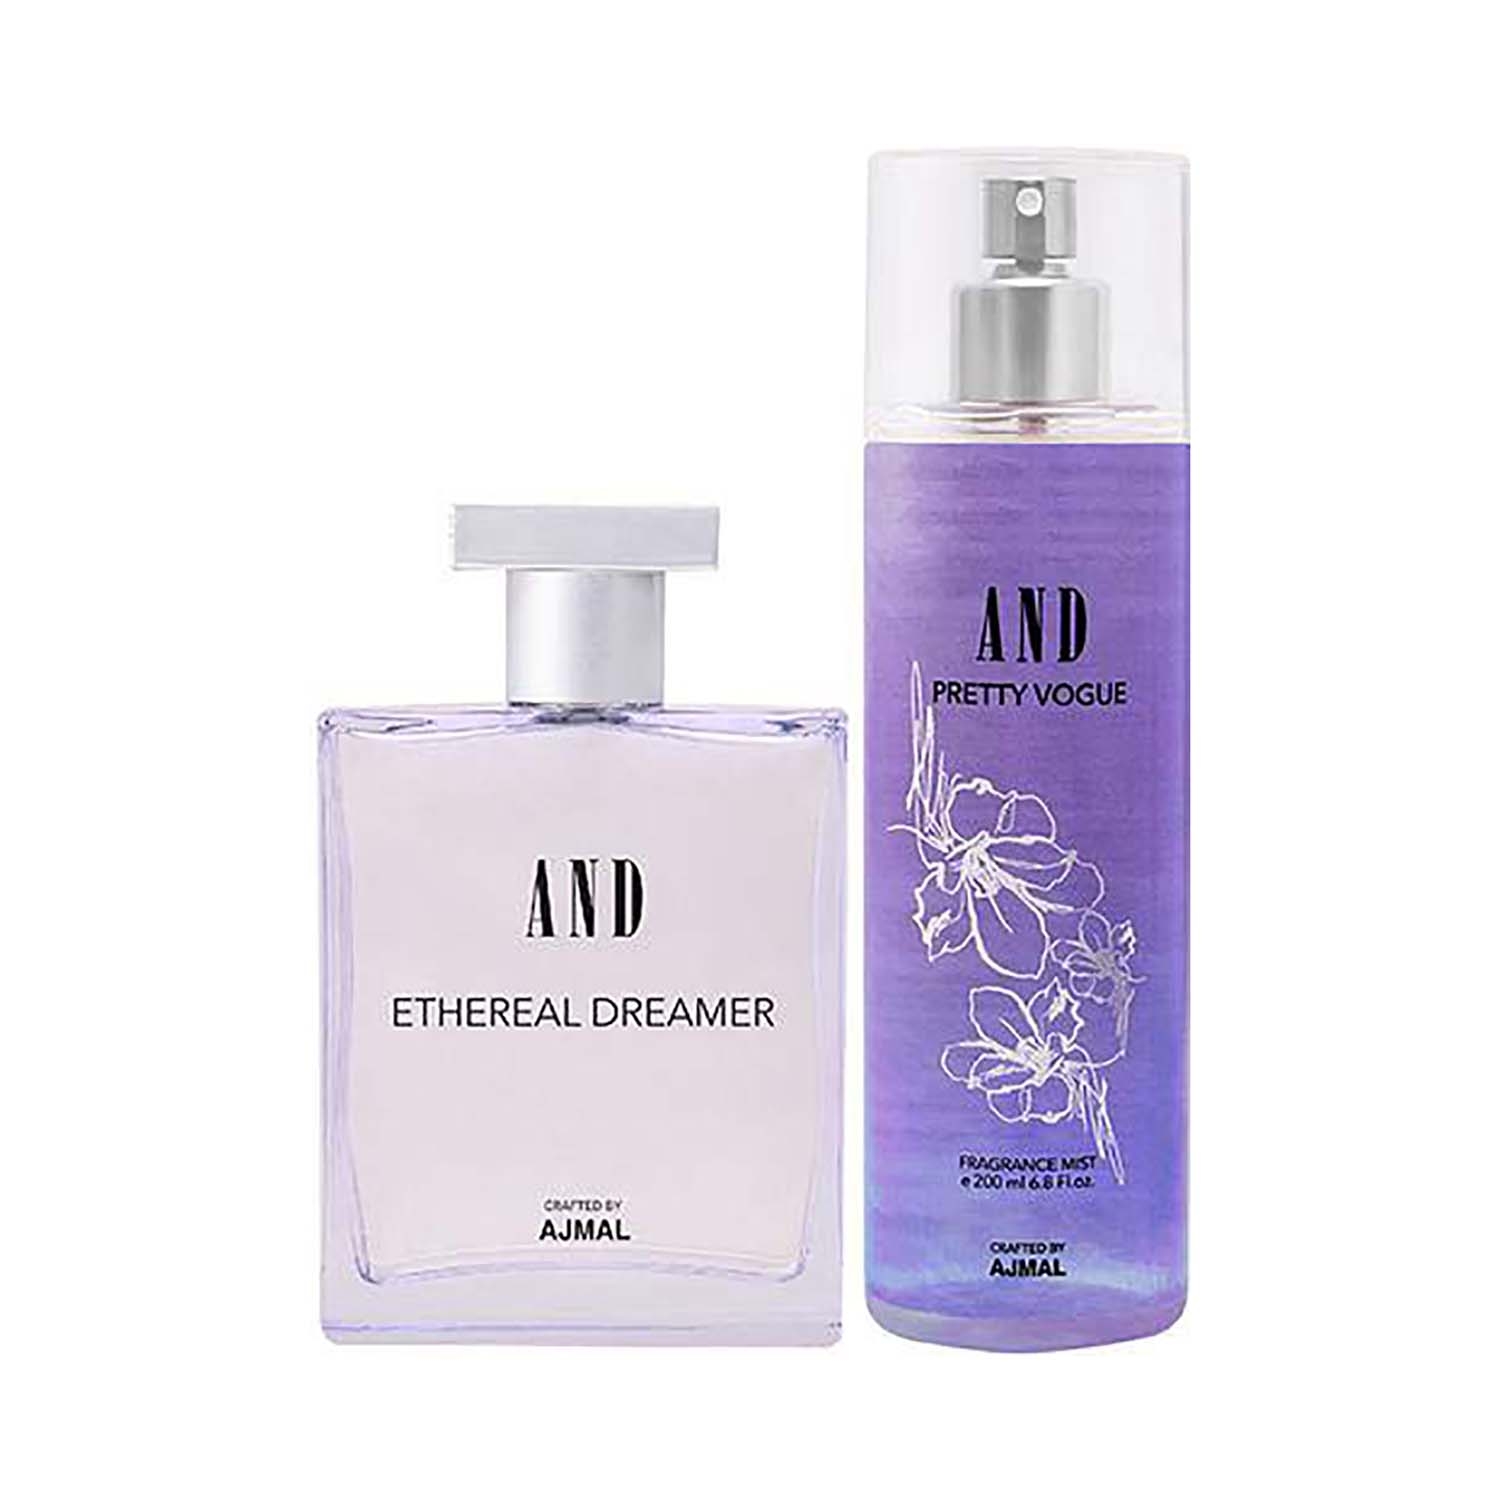 AND | AND Ethereal Dreamer Eau De Parfum & Pretty Vogue Body Mist (300 ml) - (Pack Of 2)